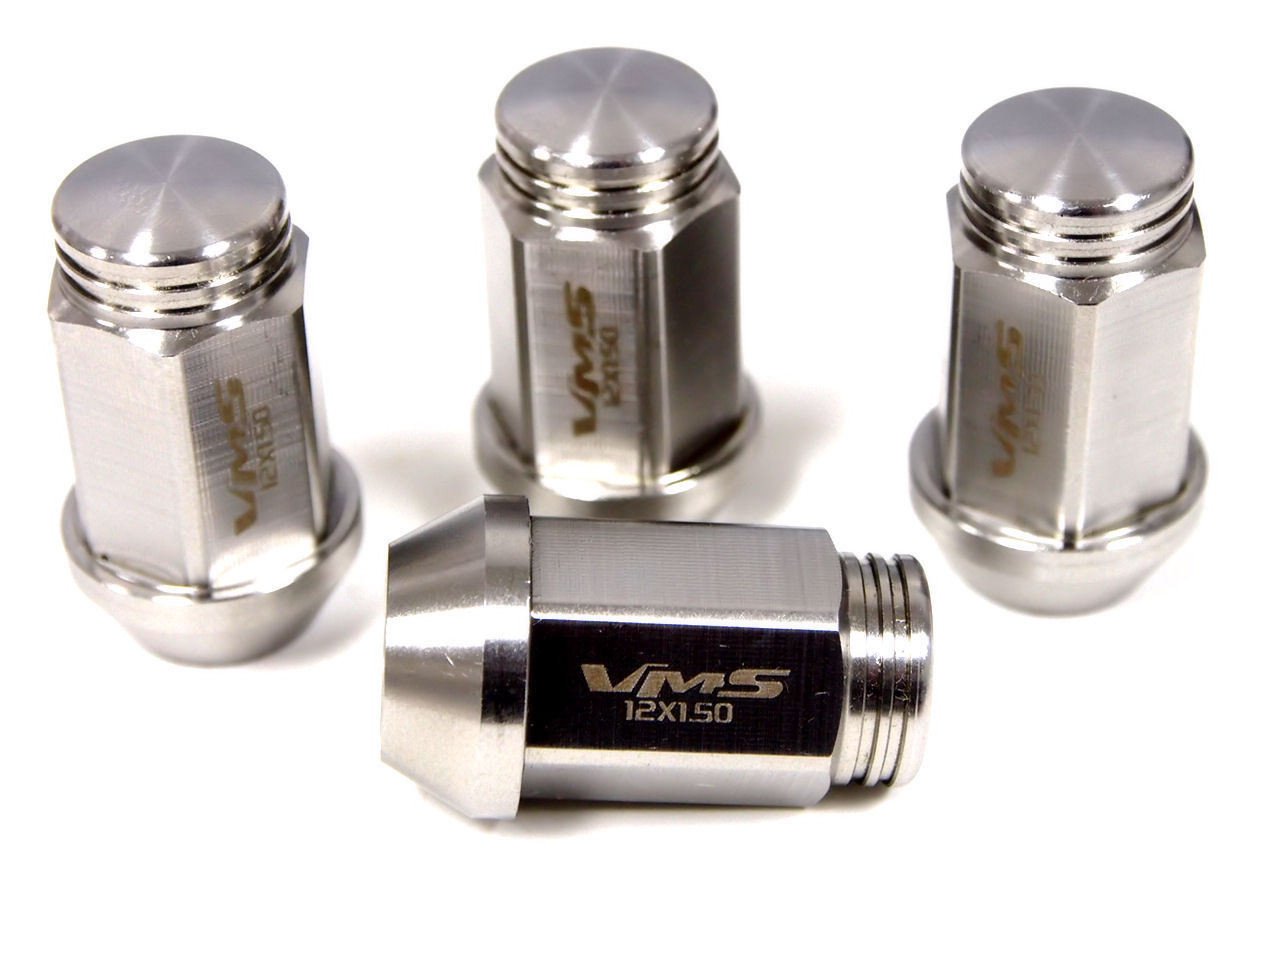 C4 / C5 / C6 and C7 Corvette All Models Stainless Steel Racing Lug Nuts 12x1.5 MM, SET of 20